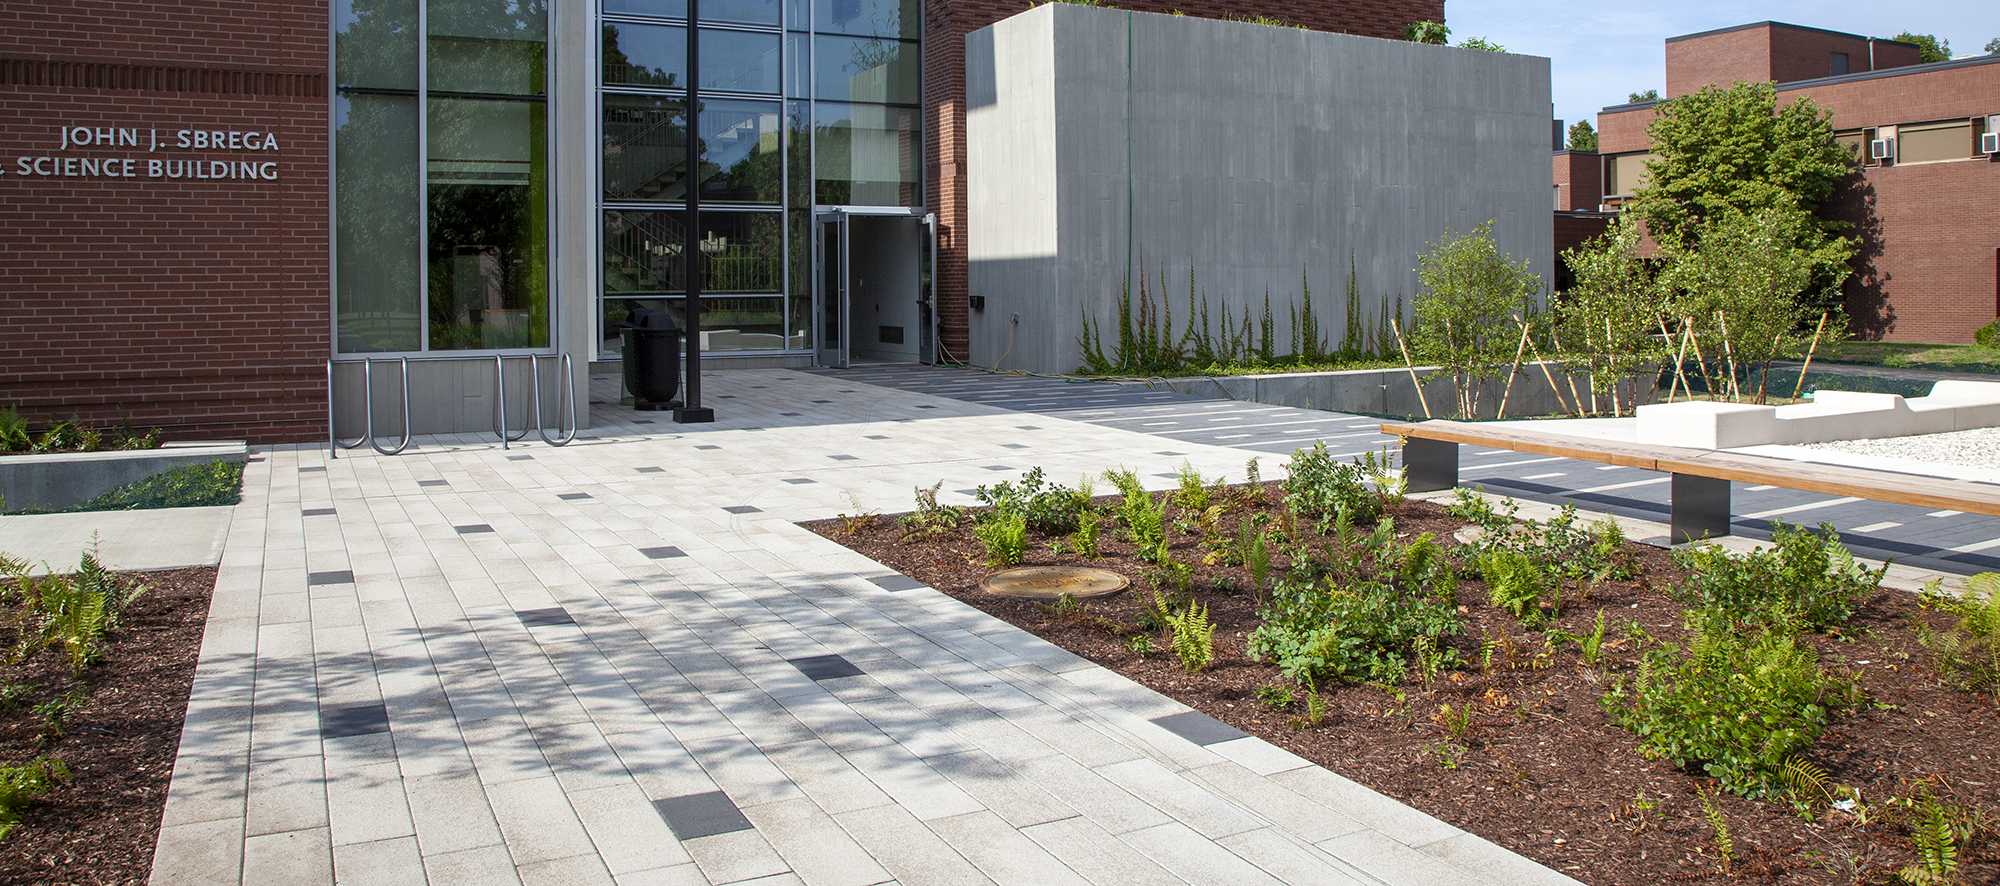 The entry of the John J.Sbrega Science Building has bike racks, gardens and lights, with patterned paths paved in Promenade Plank.